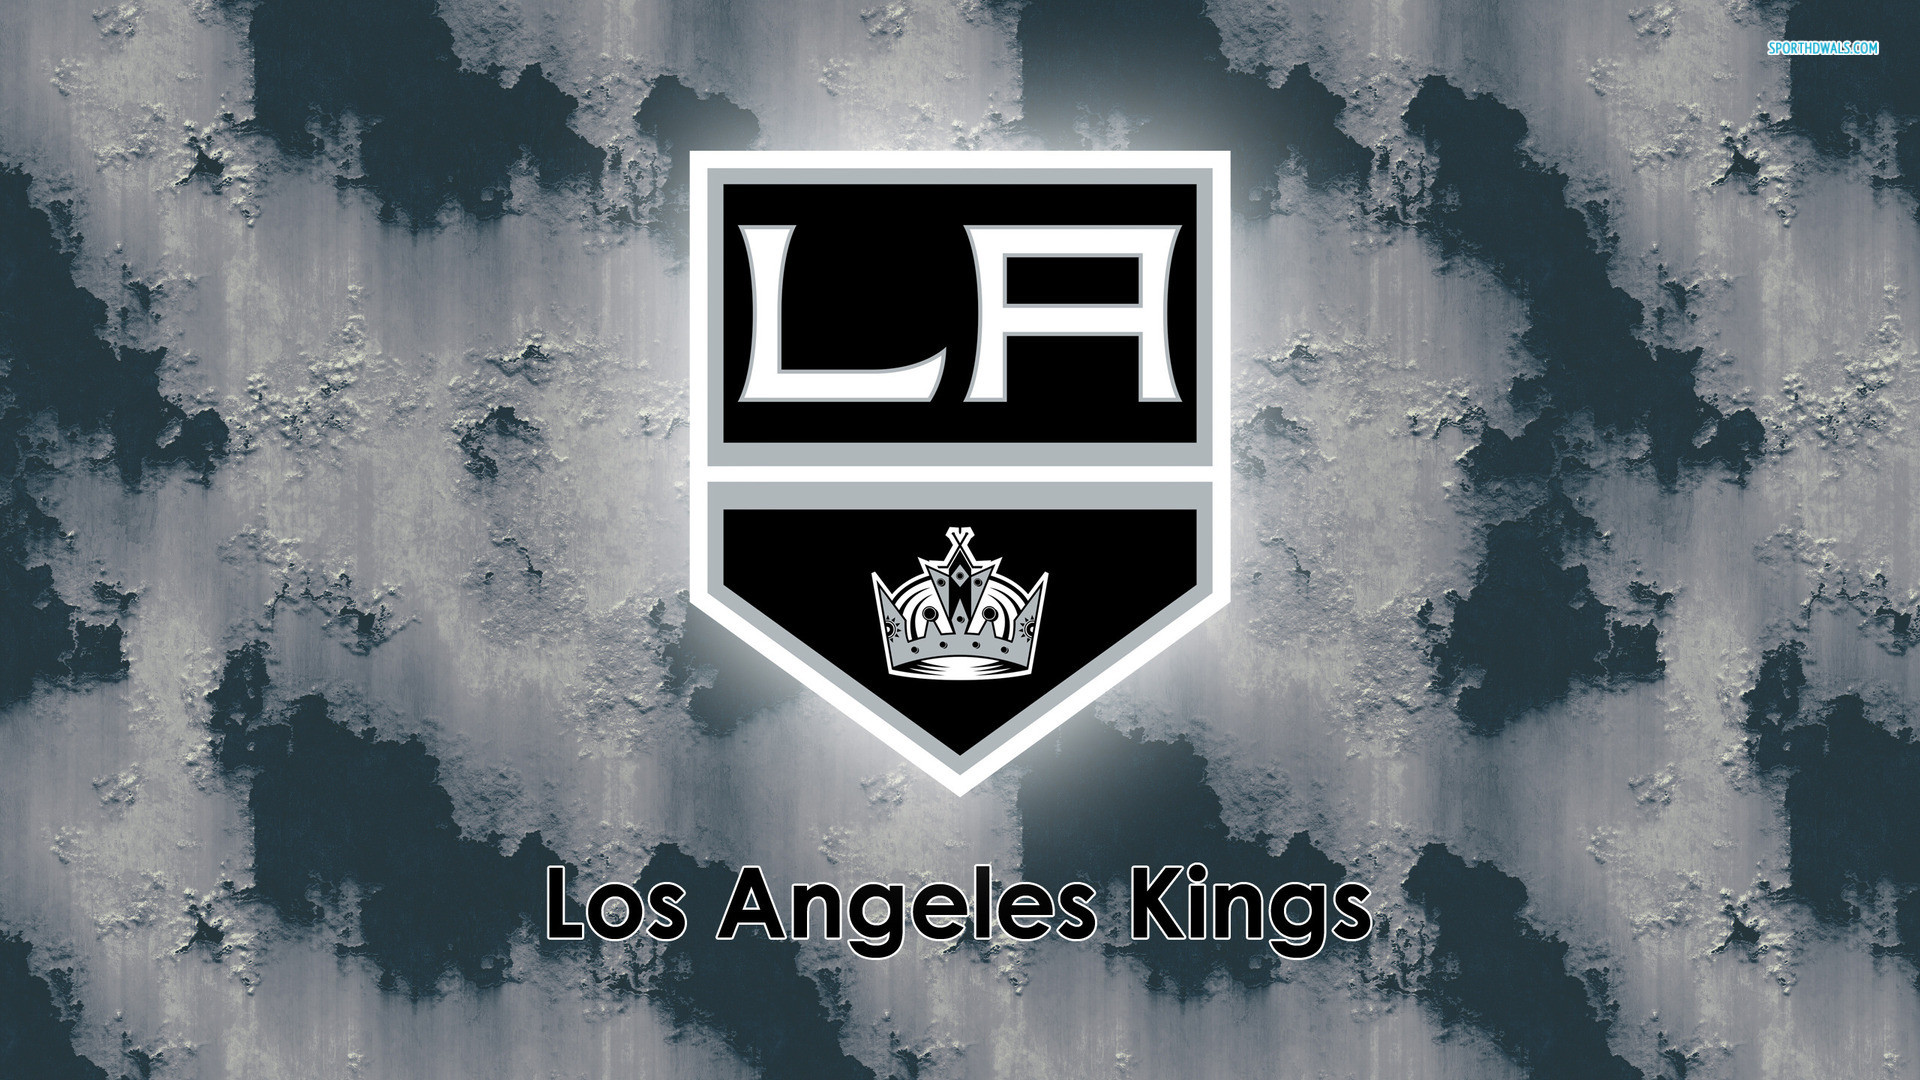 1920x1080 Los angeles kings wallpaper hd - ironicas images of dogs